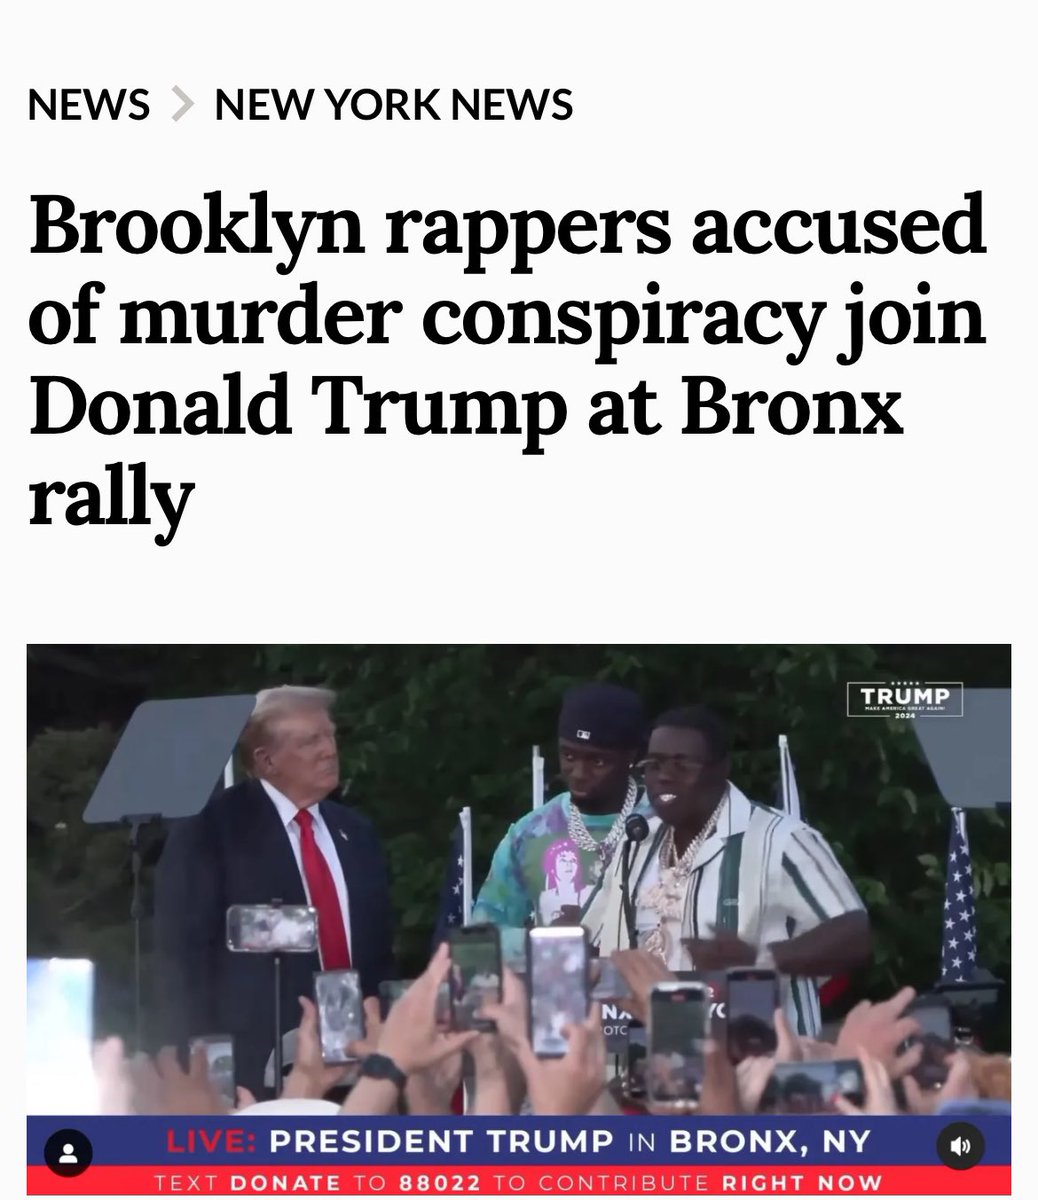 MSM is failing us. Only ONE publication, the NY Daily News, has printed a story about Trump inviting Sheff G and Sleepy Hallow (who are facing a murder conspiracy charge and more) on stage with him at his Bronx rally tonight. Shameful.